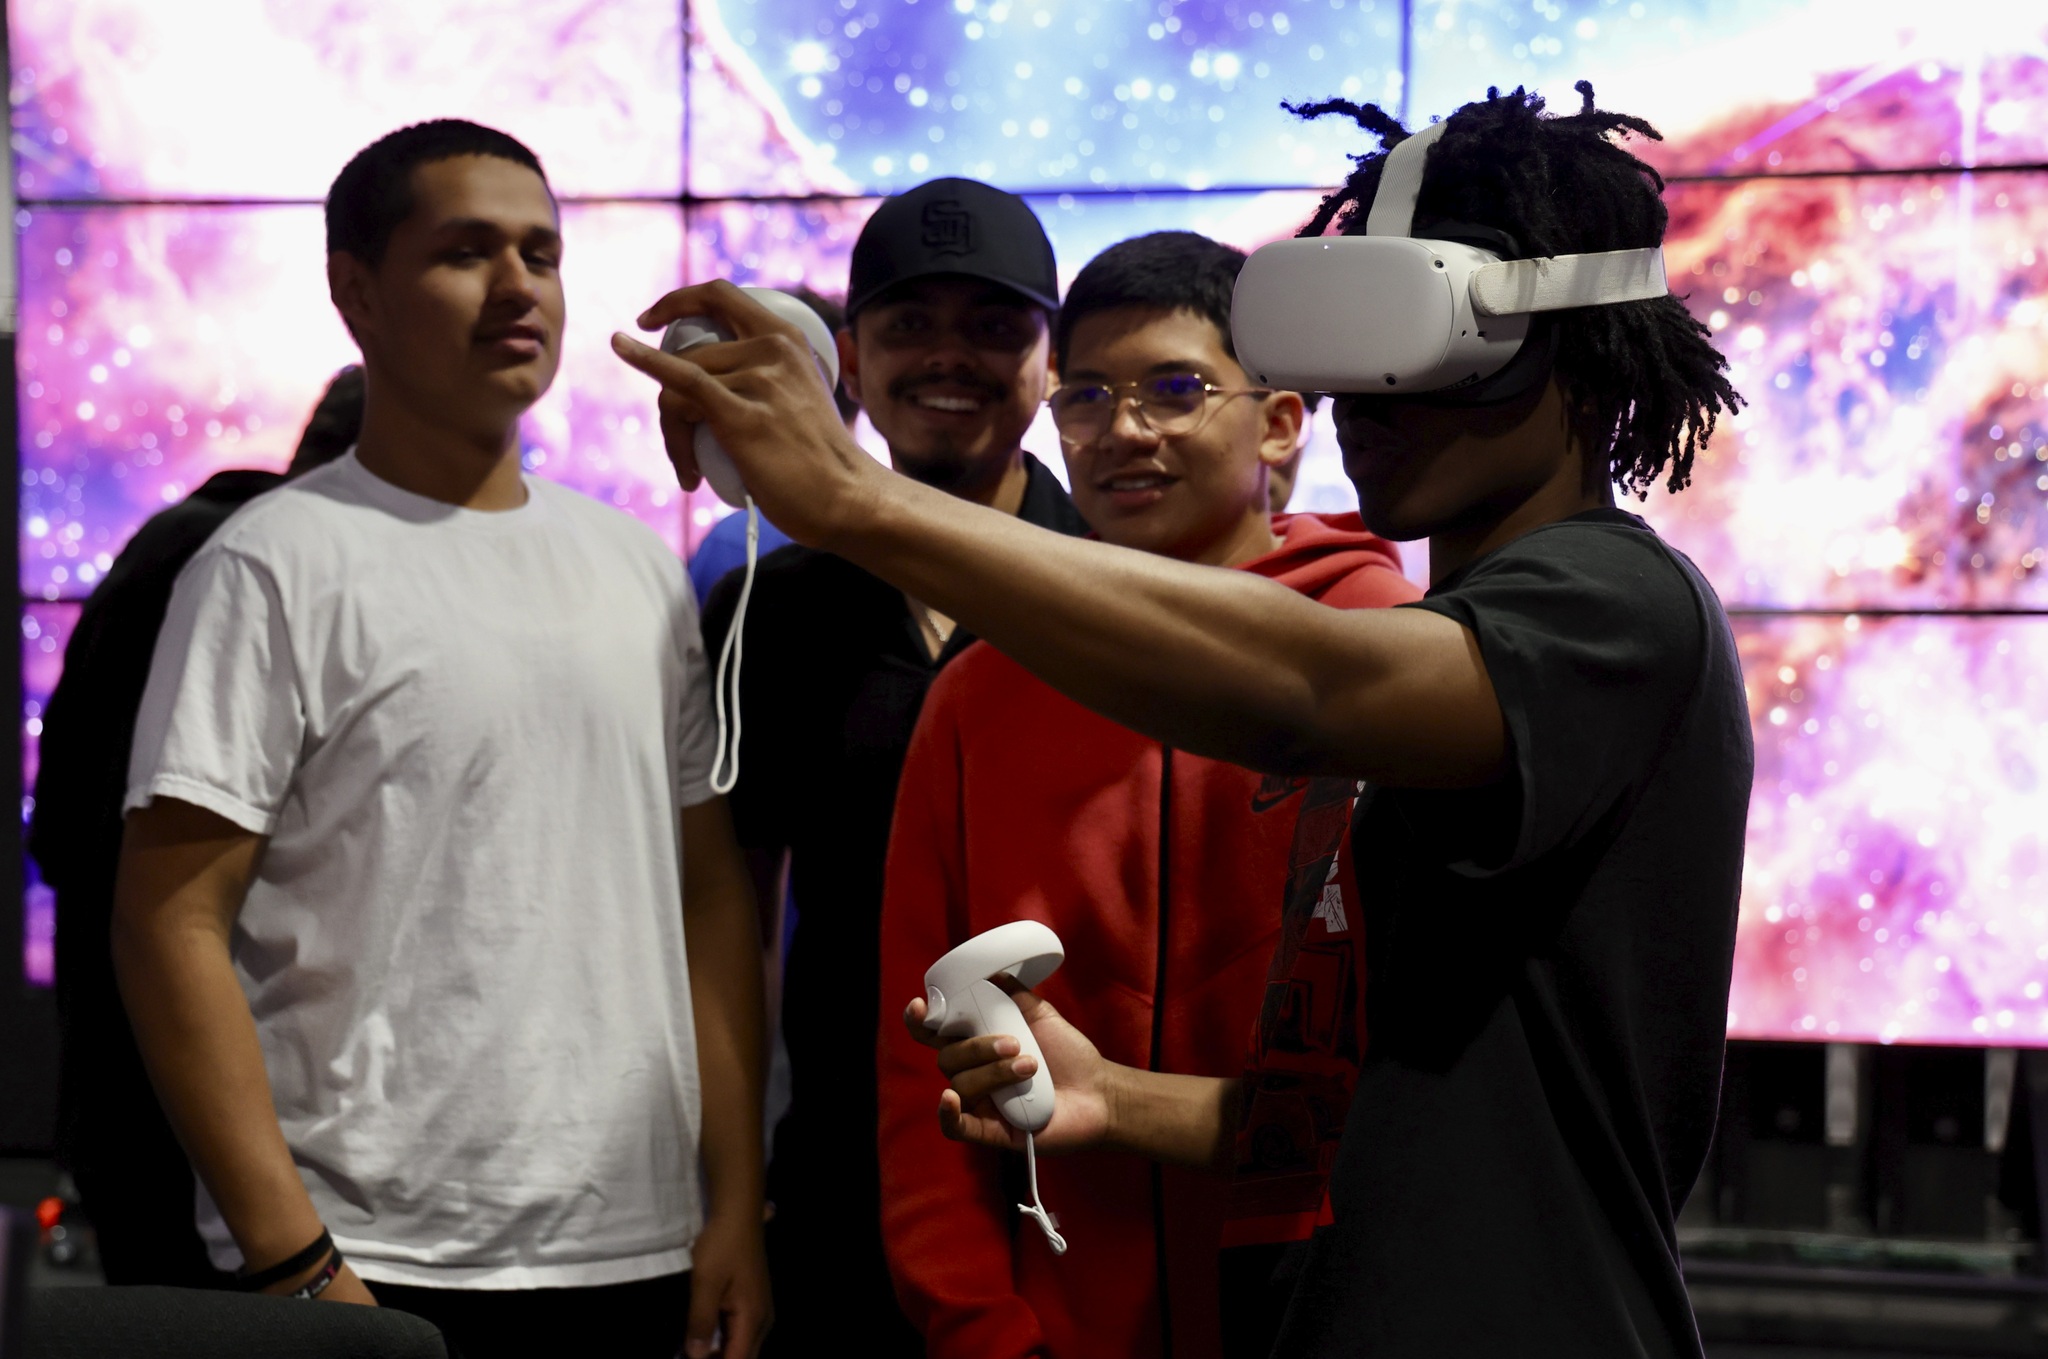 Del Valle students try out VR in the TACC visualization lab at the Oden Institute. Credit: Joanne Foote/Oden Institute